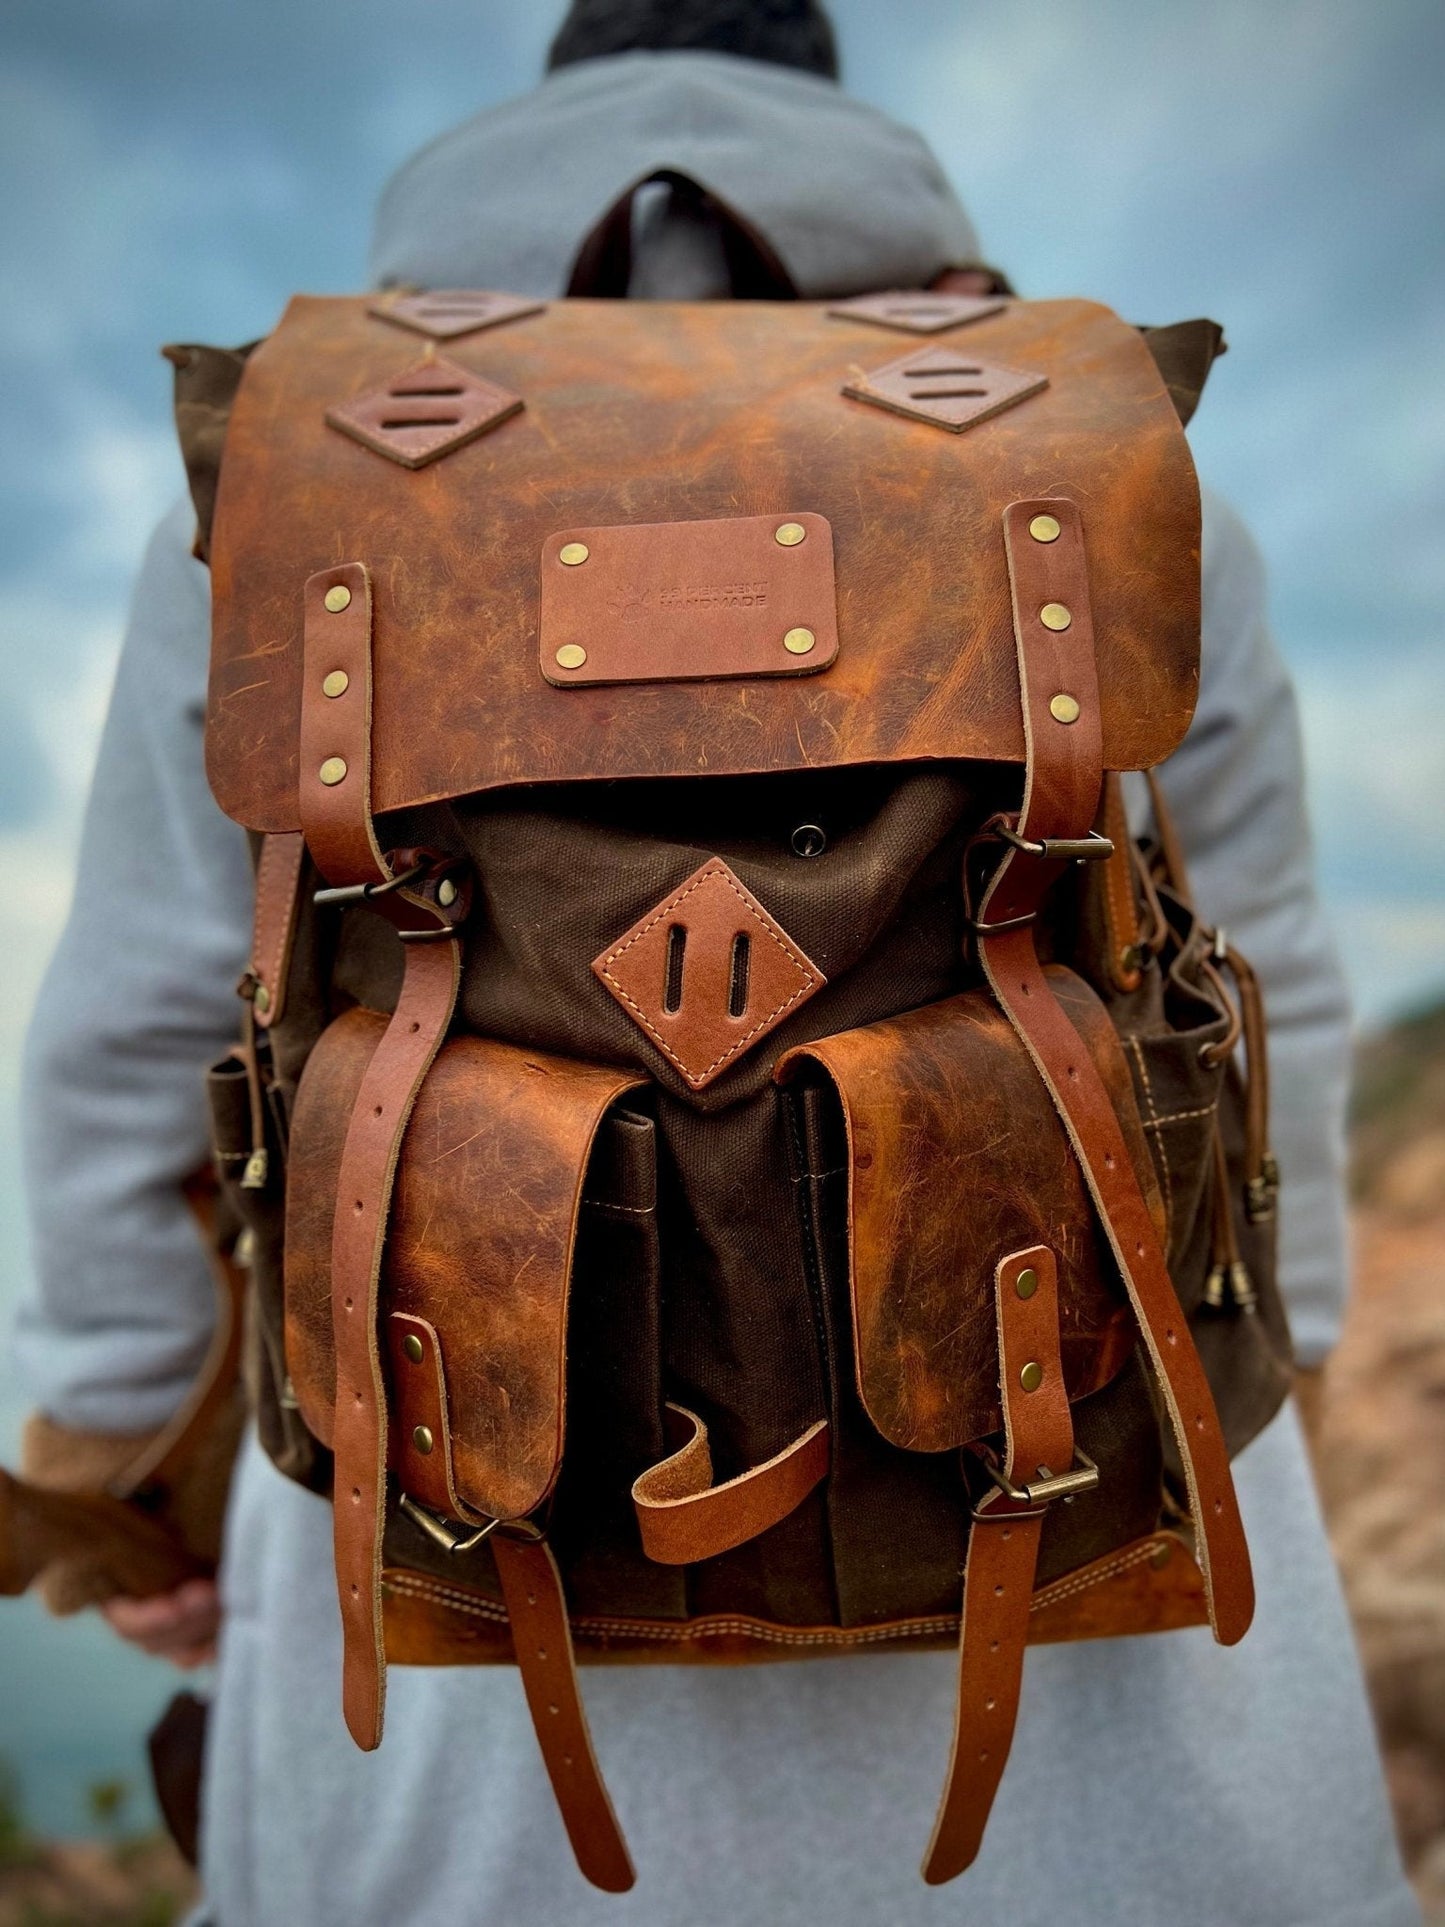 updated Custom order for Ryan | Brown 50 leather giza backpack | Bushcraft  | Camping  | Hiking | Rucksack | Backpack | Outdoor Backpack | Personalization bushcraft - camping - hiking backpack 99percenthandmade   